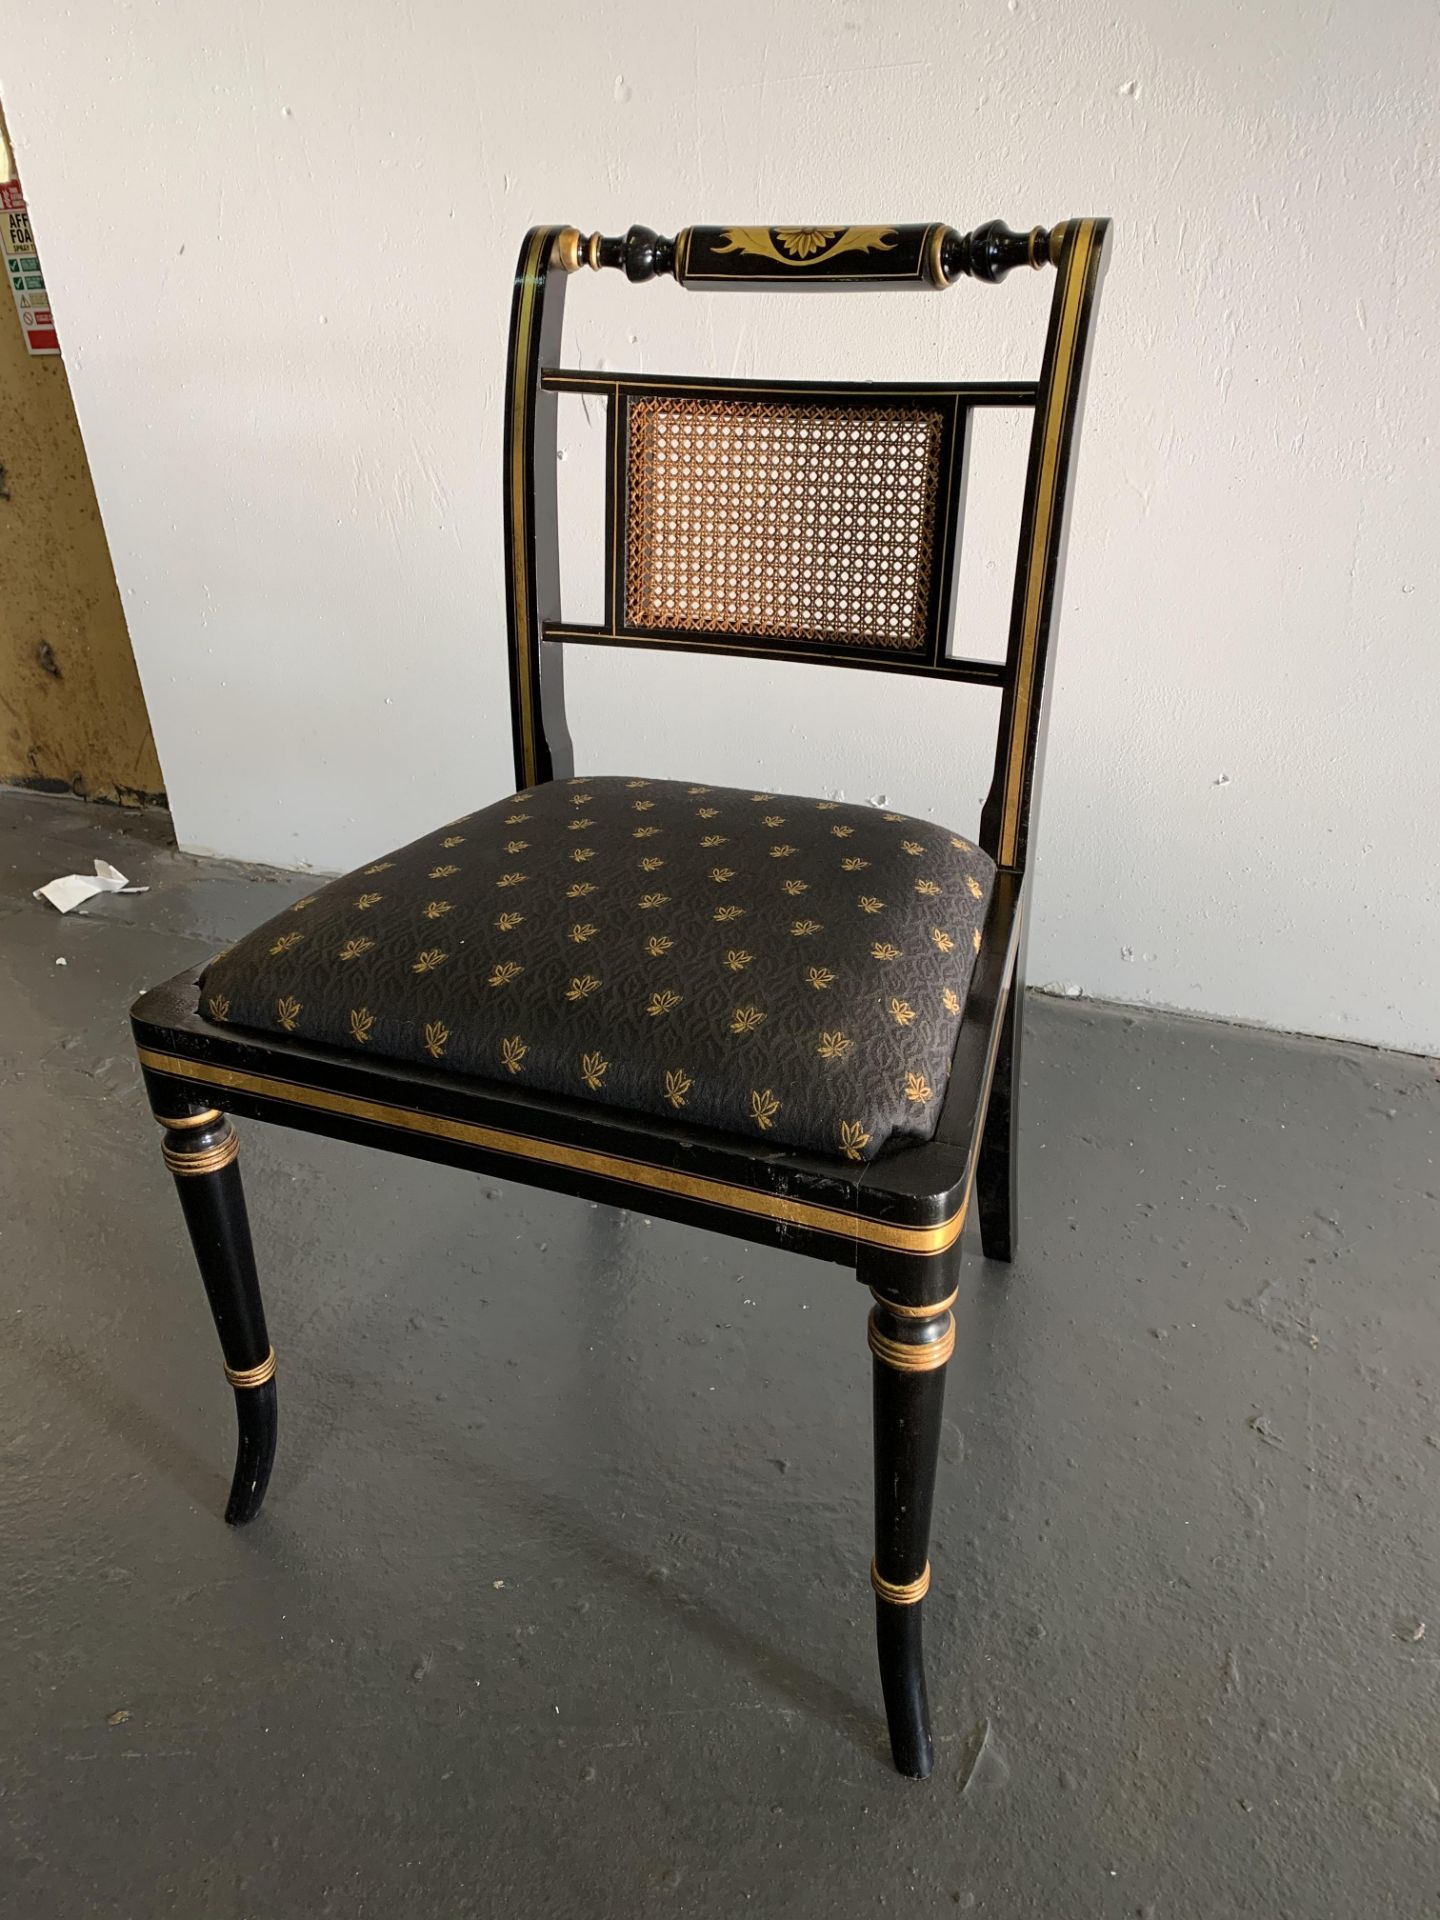 Ebony and Gold LEaf side Chair with top turned rail gold pattern pad detail